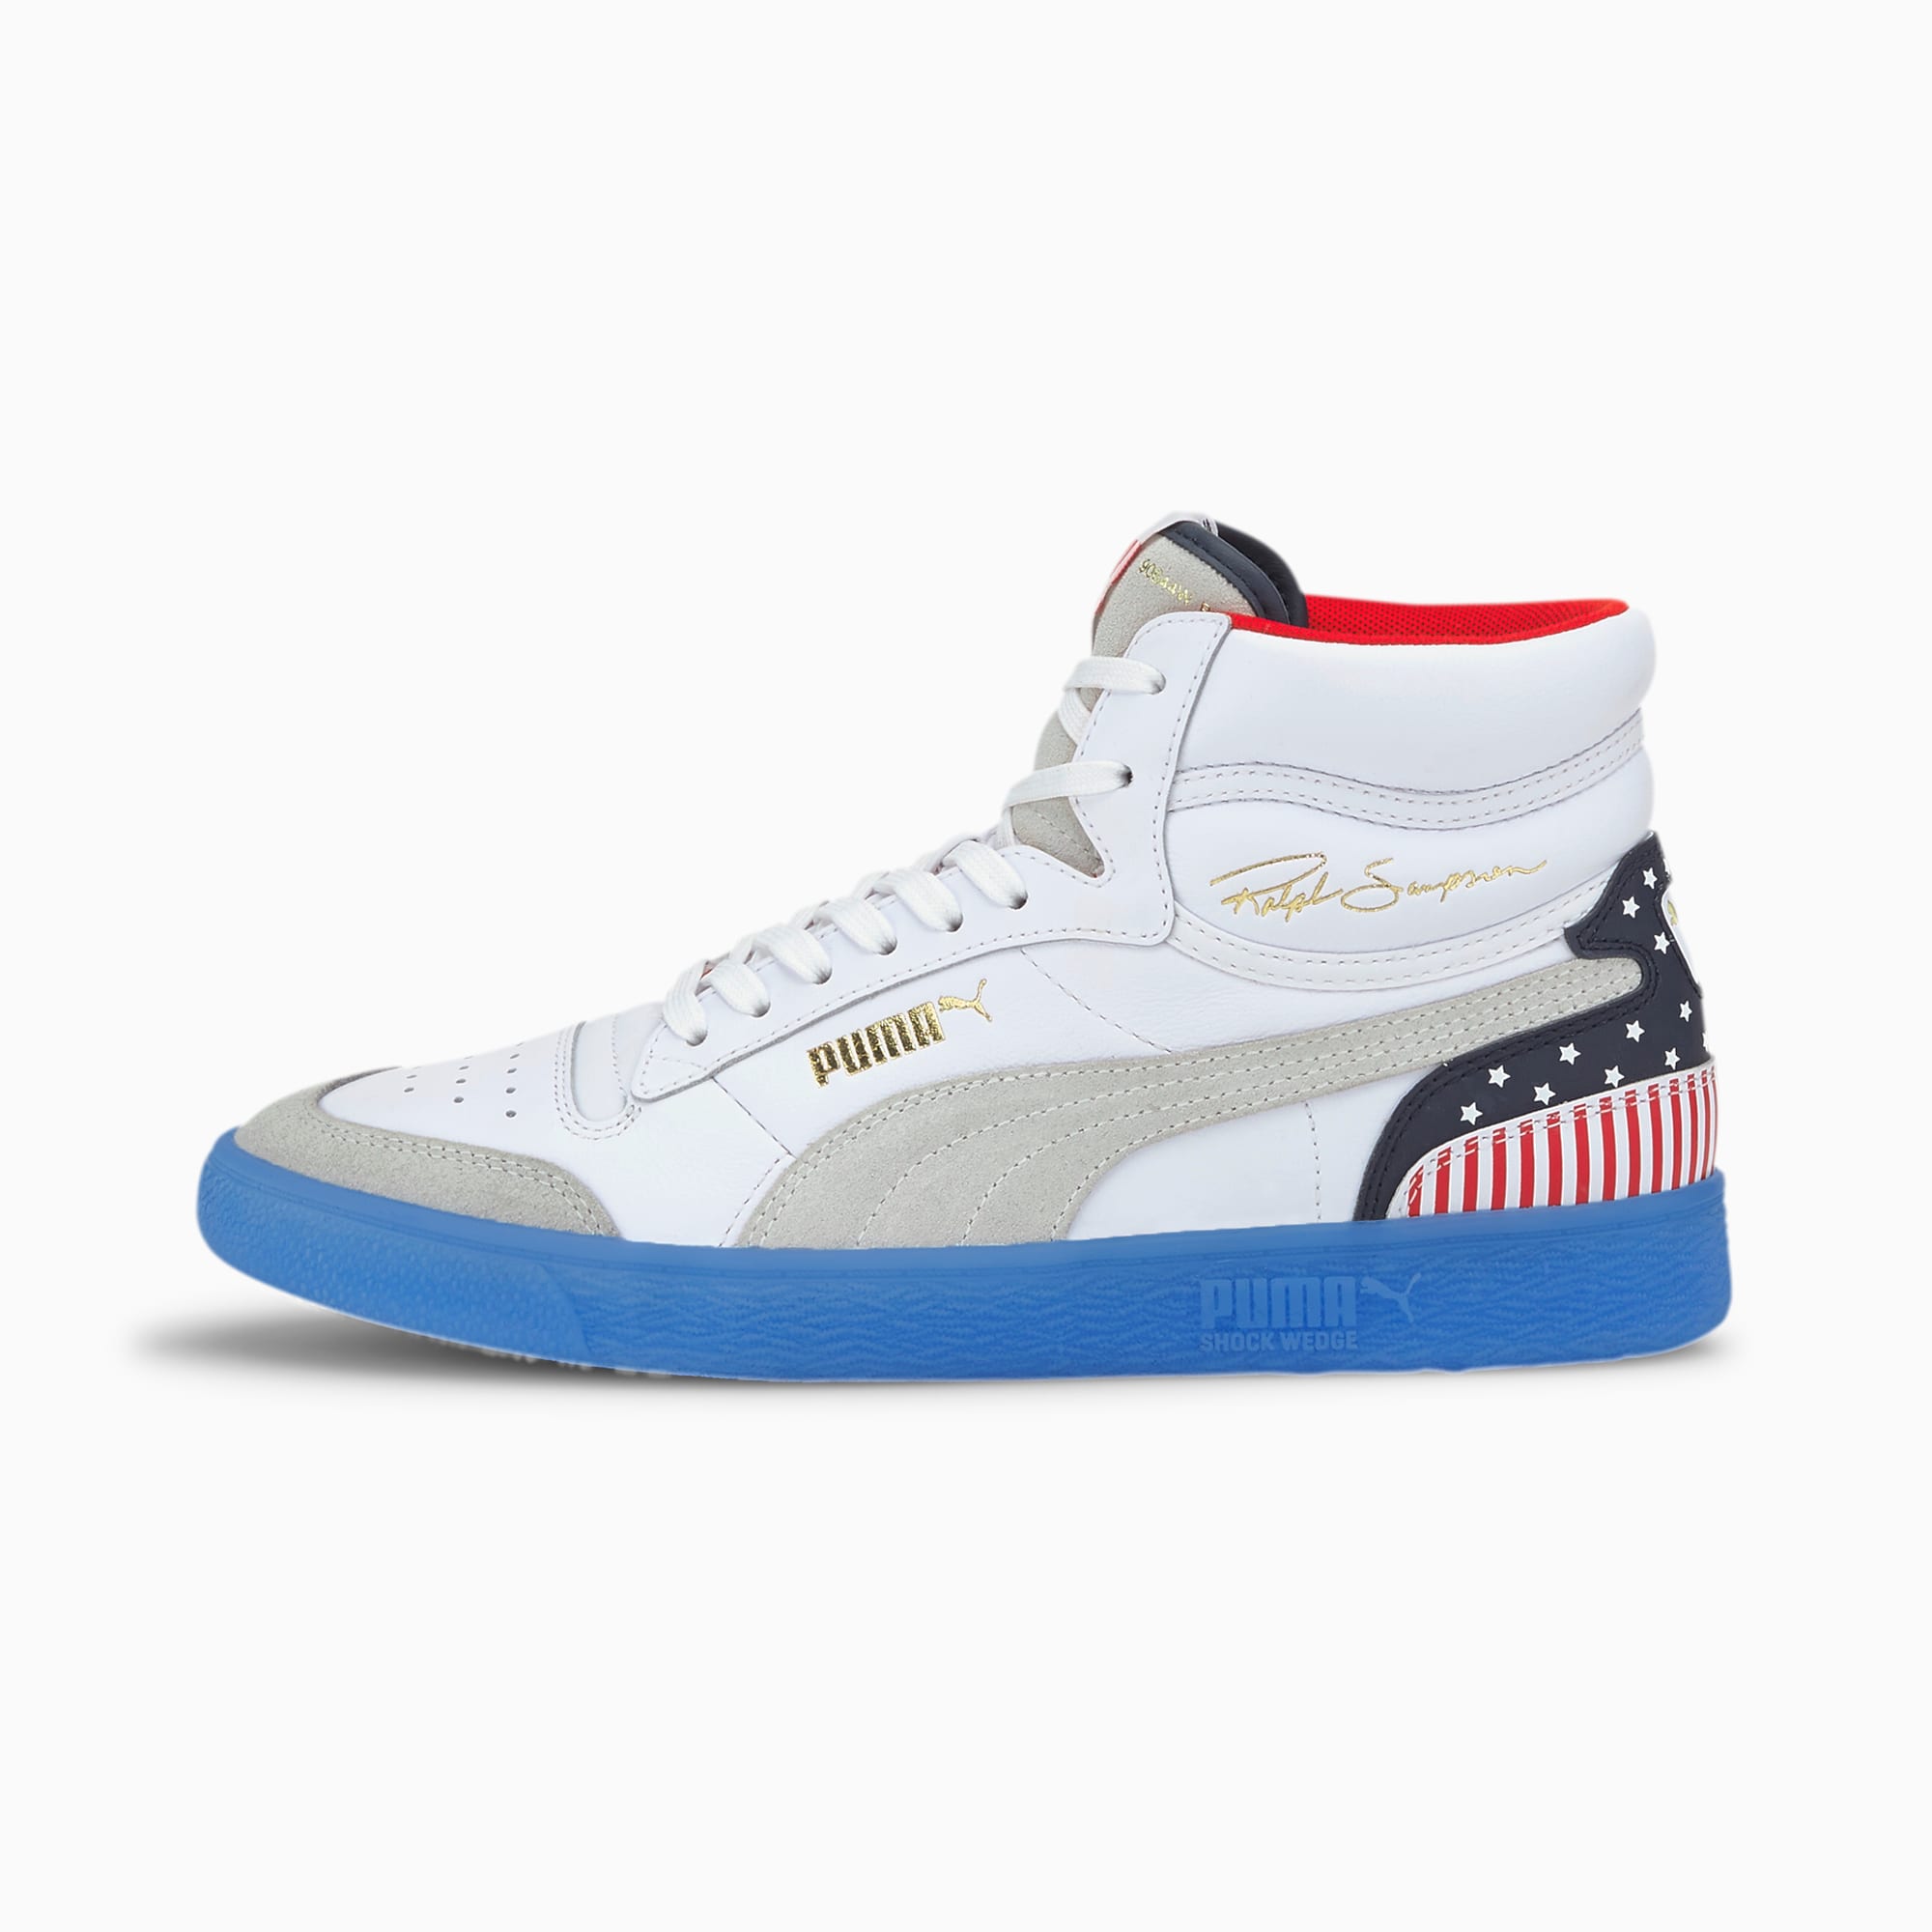 4th of july sneakers